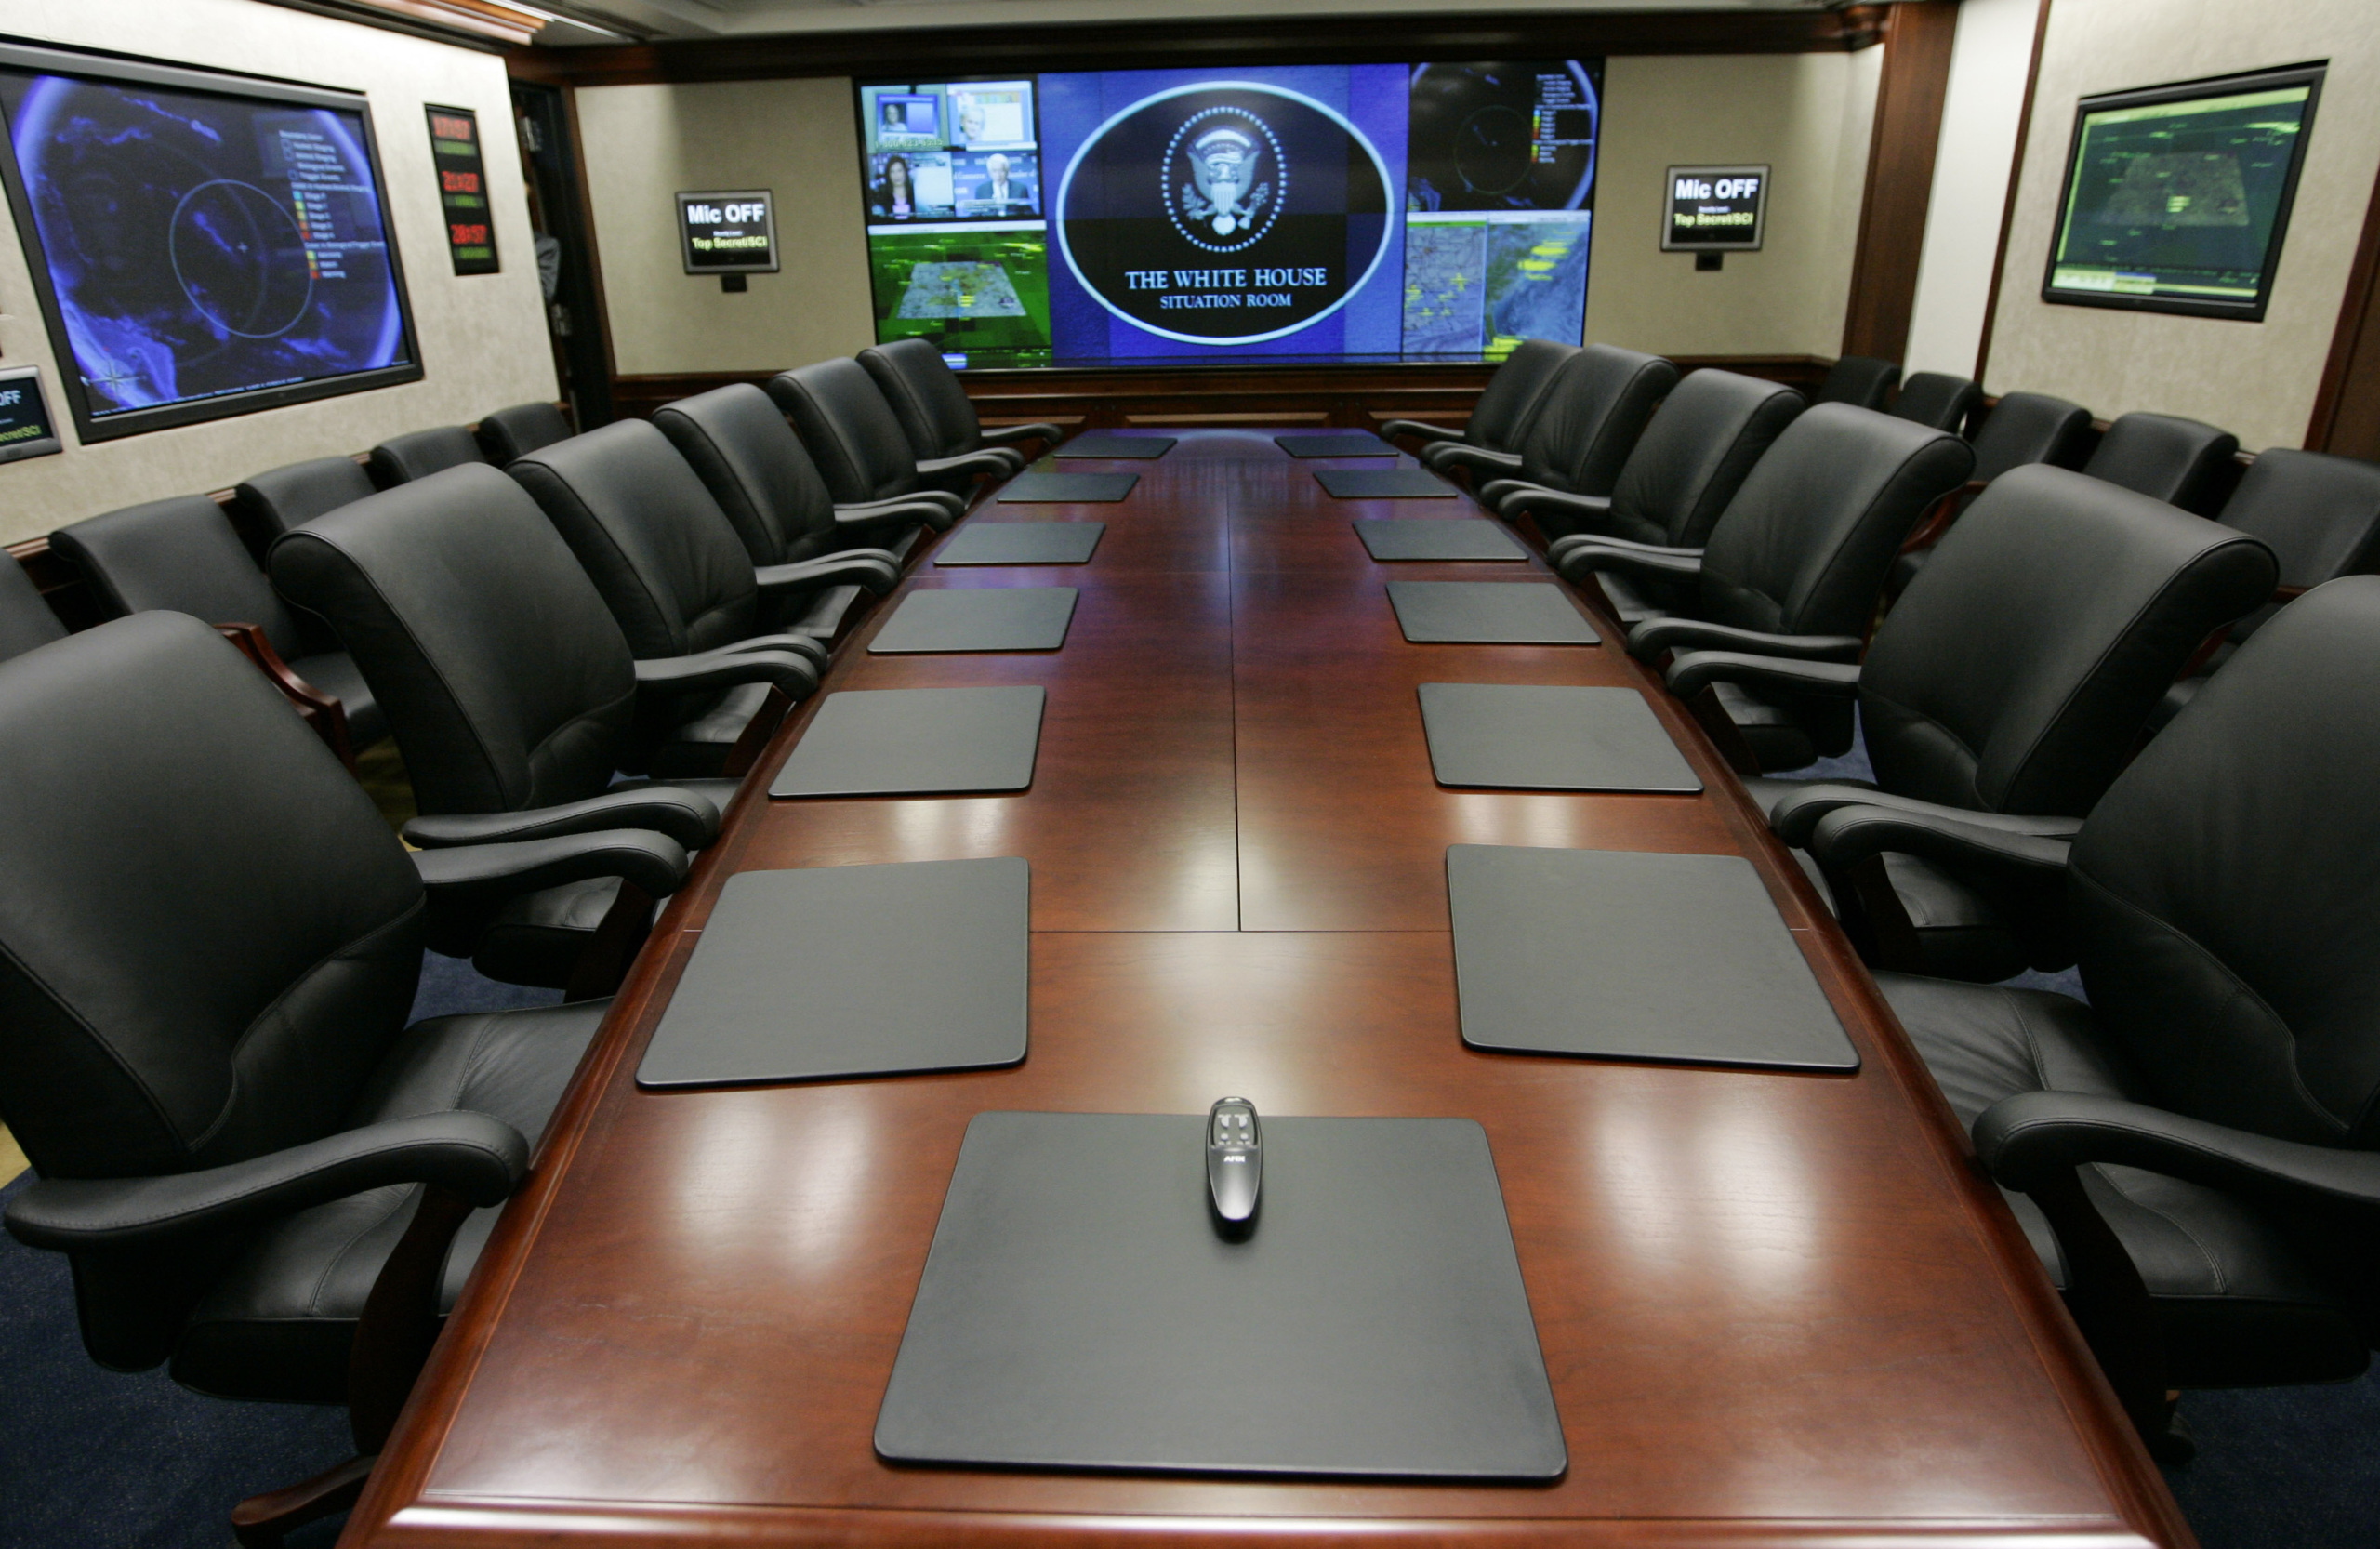 The view from former President George W. Bush's chair in the Situation Room of the White House, Washington, May 2007. (AP/Charles Dharapak)